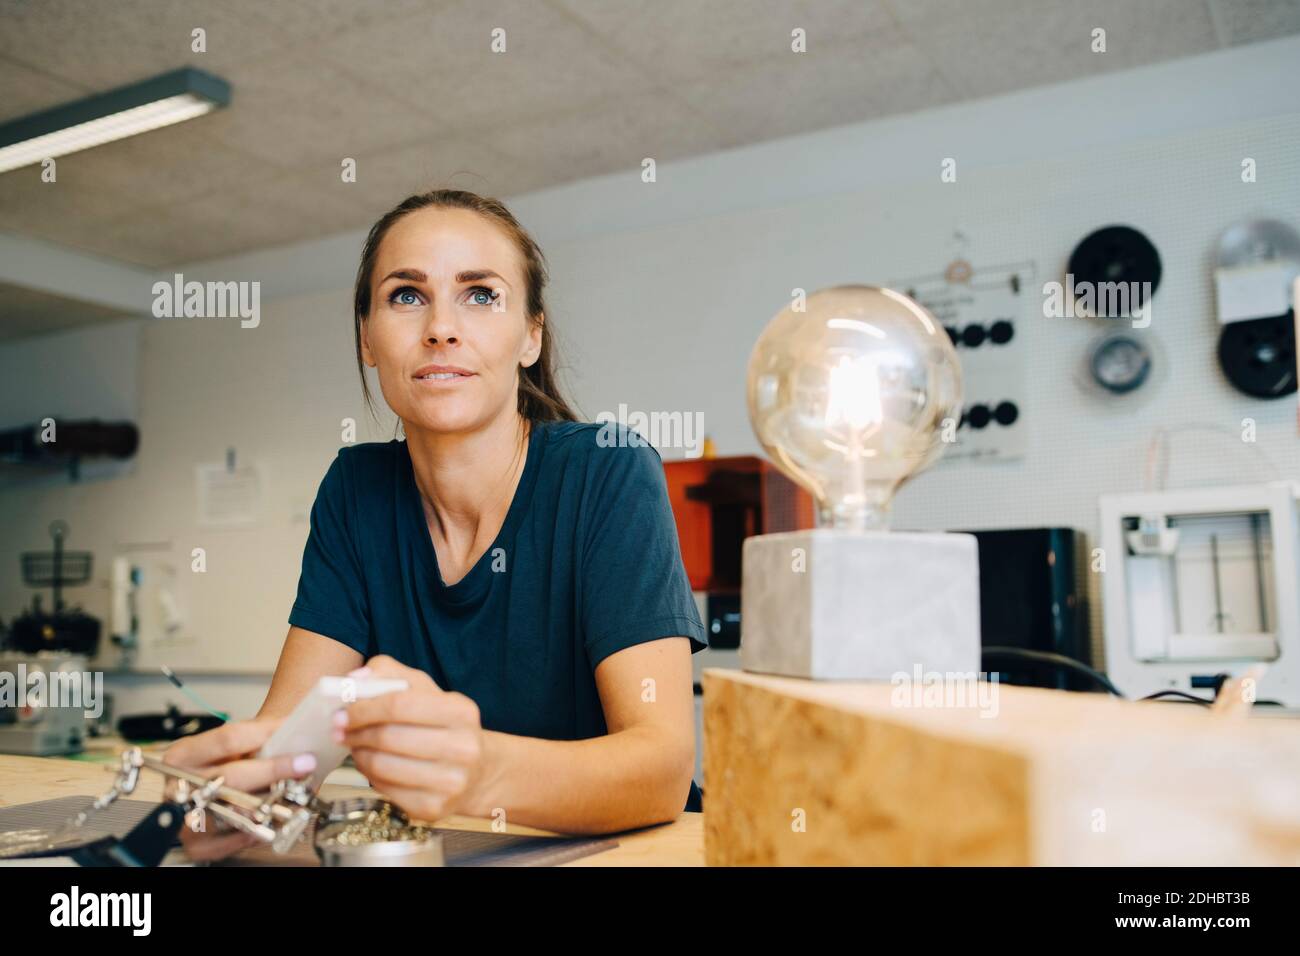 Thoughtful female technician looking away while sitting at workbench in creative office Stock Photo